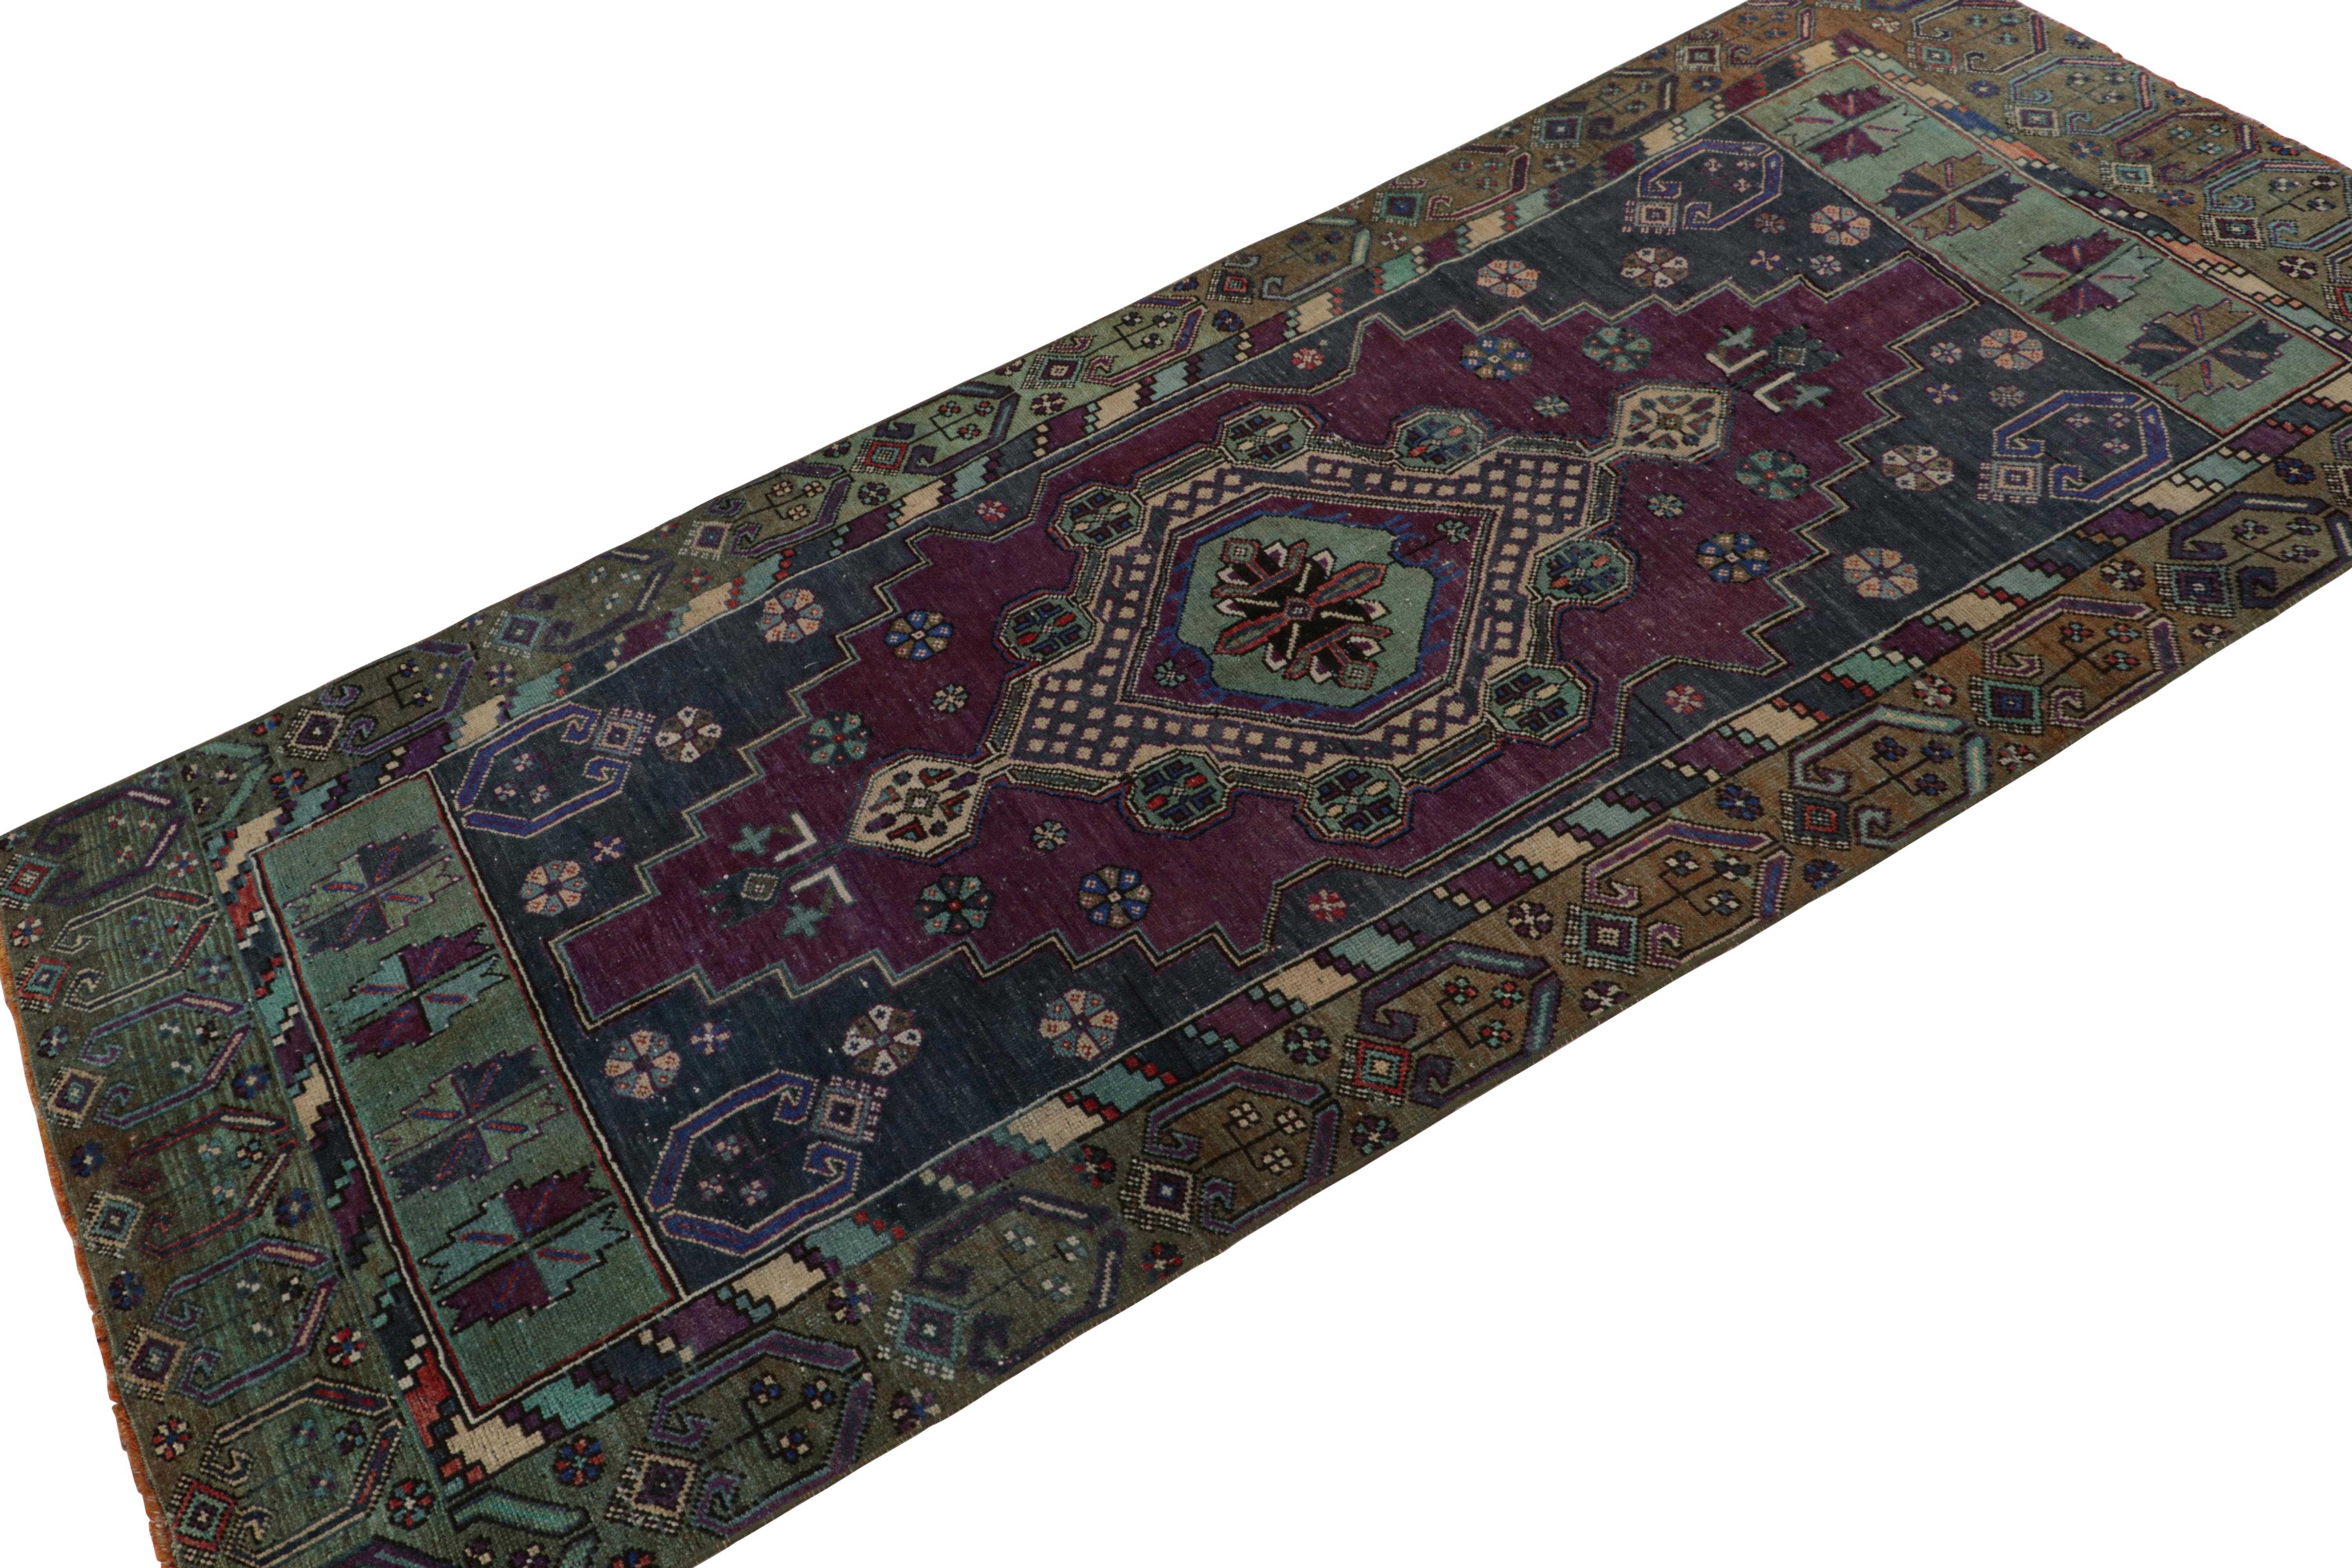 Hand Knotted in wool, this vintage 3x7 Turkish Oushak runner rug features a central medallion and geometric patterns on a rich aubergine field. 

On the Design: 

Connoisseurs will admire this personal vintage piece meant to catch the eye, yet still